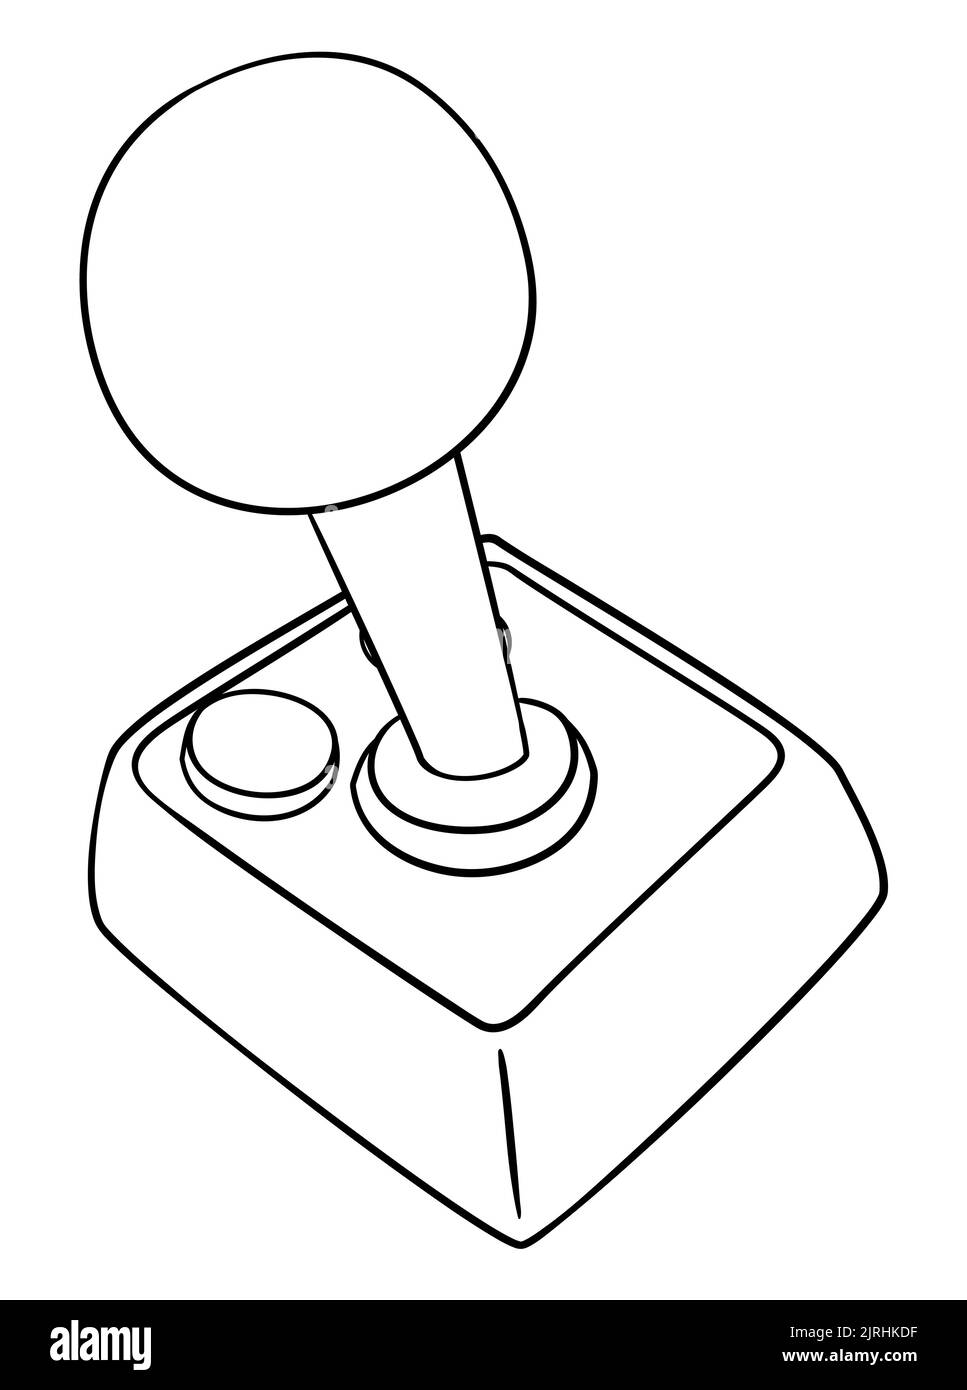 Colorless design in outline style of a retro videogame controller with joystick and buttons, ready to color it. Stock Vector